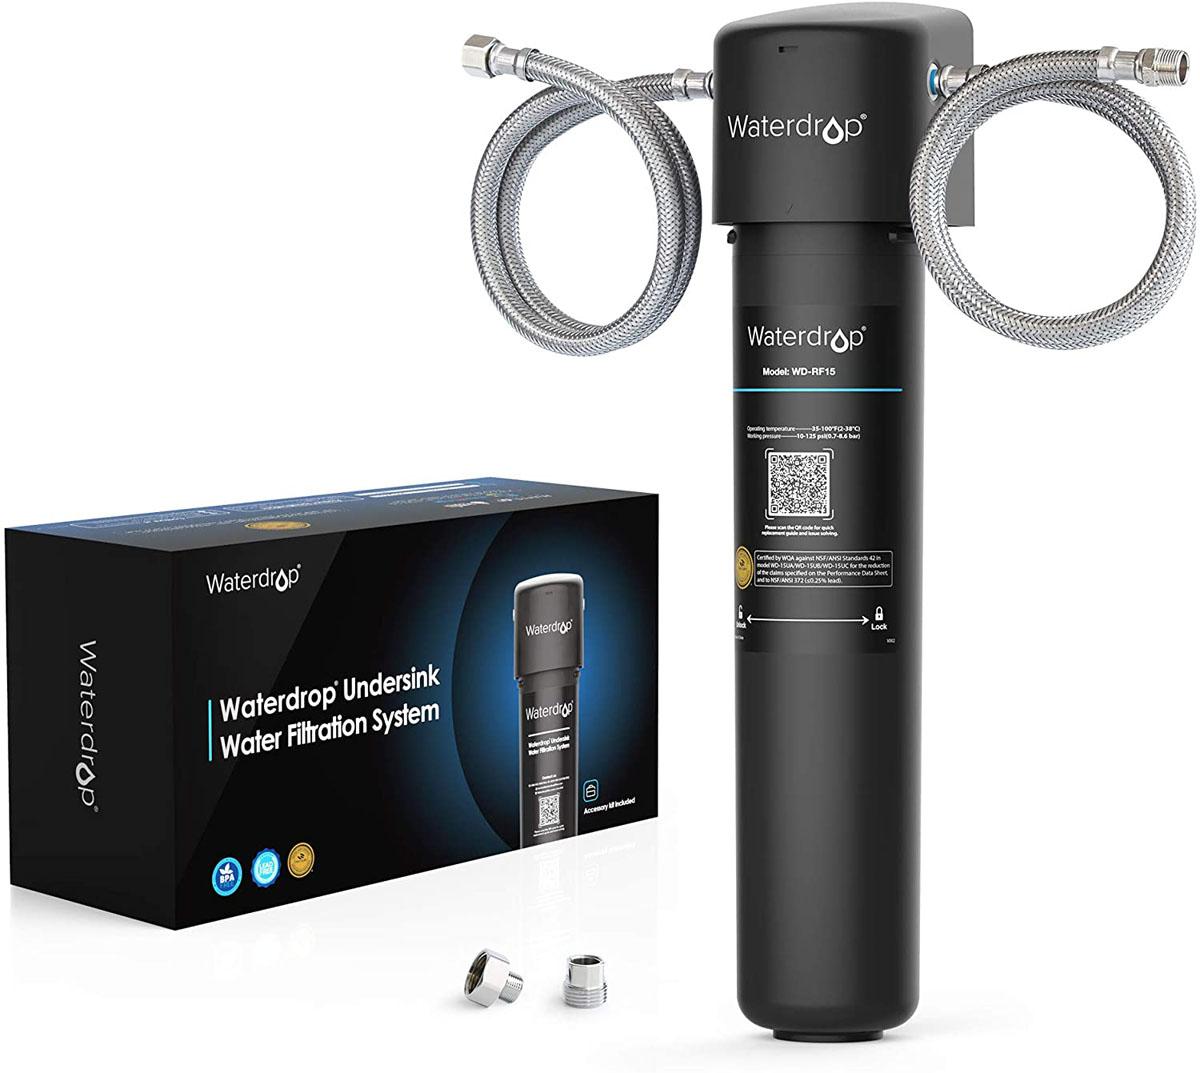 Waterdrop 15UA Under Sink Water Filtration System for $55.99 Shipped